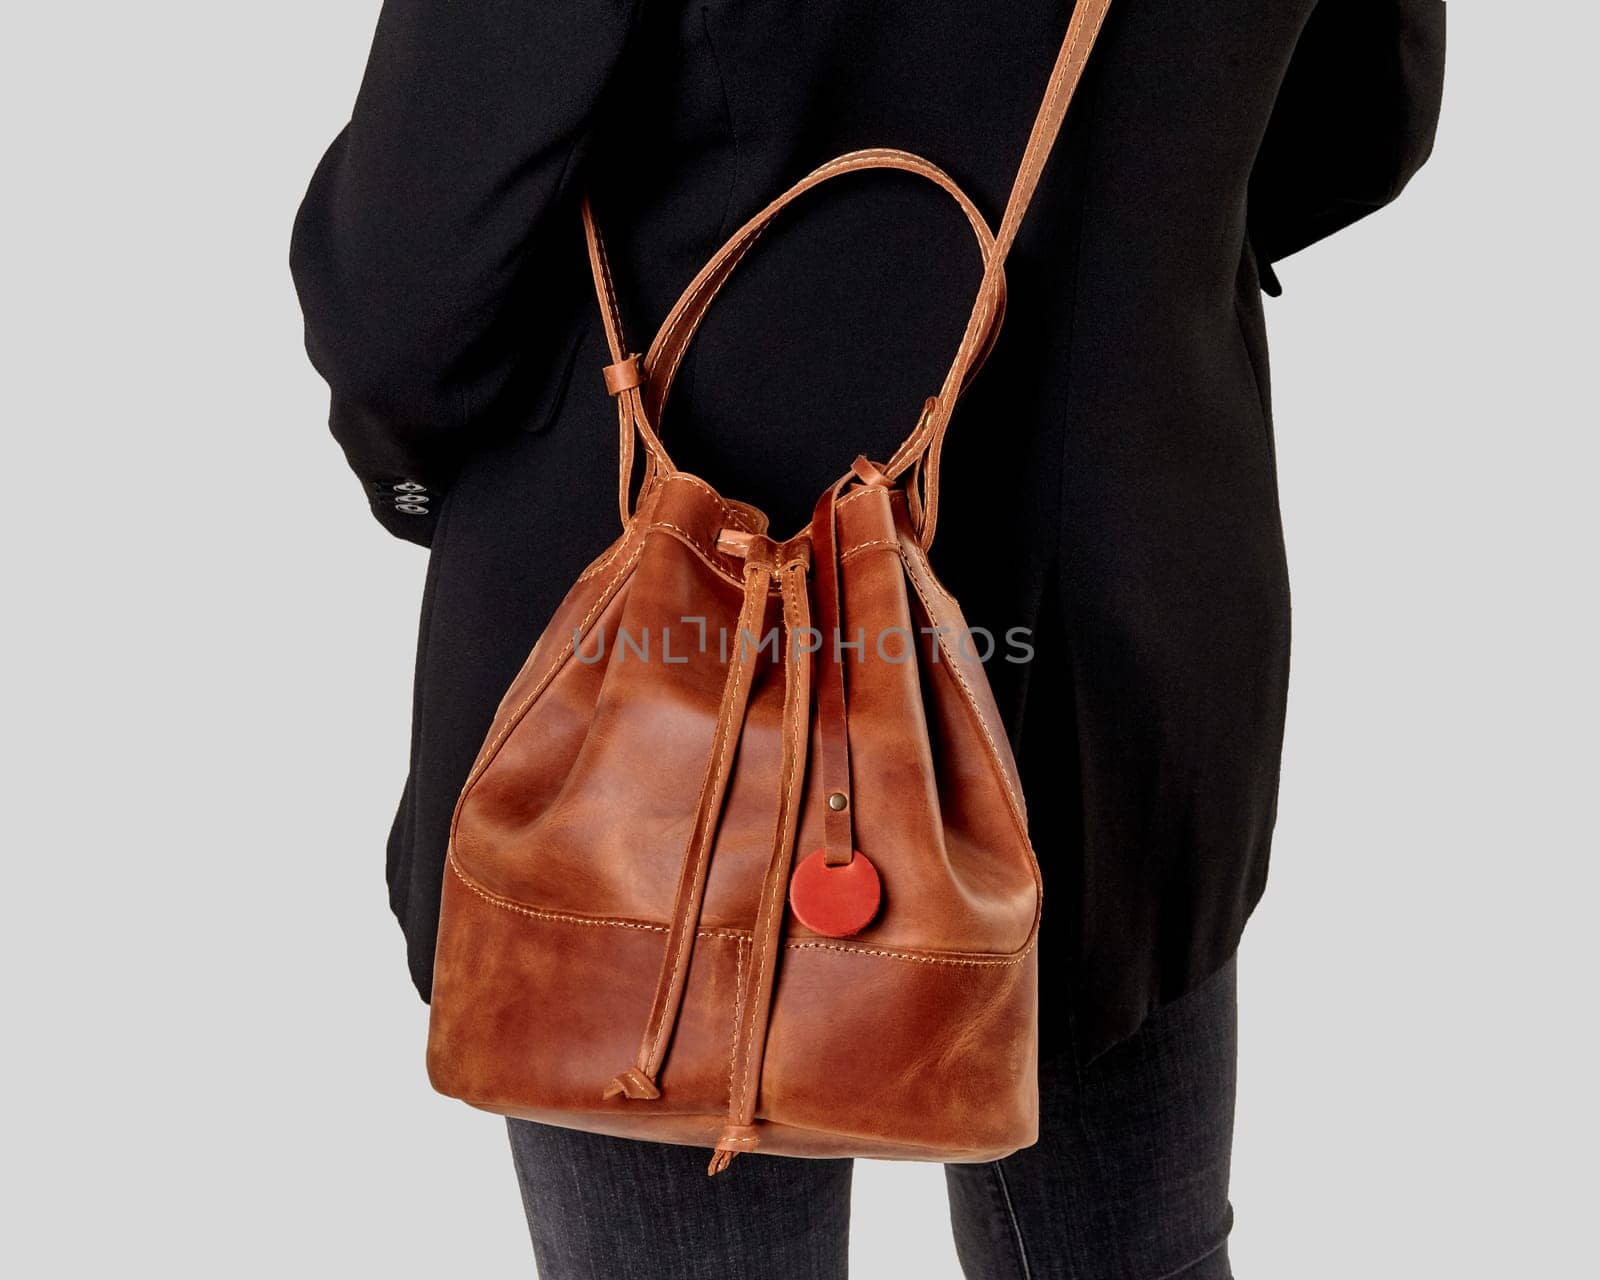 Woman in black coat carrying chic tan leather bucket bag with motivational tagline over shoulder. Stylish artisanal women accessories